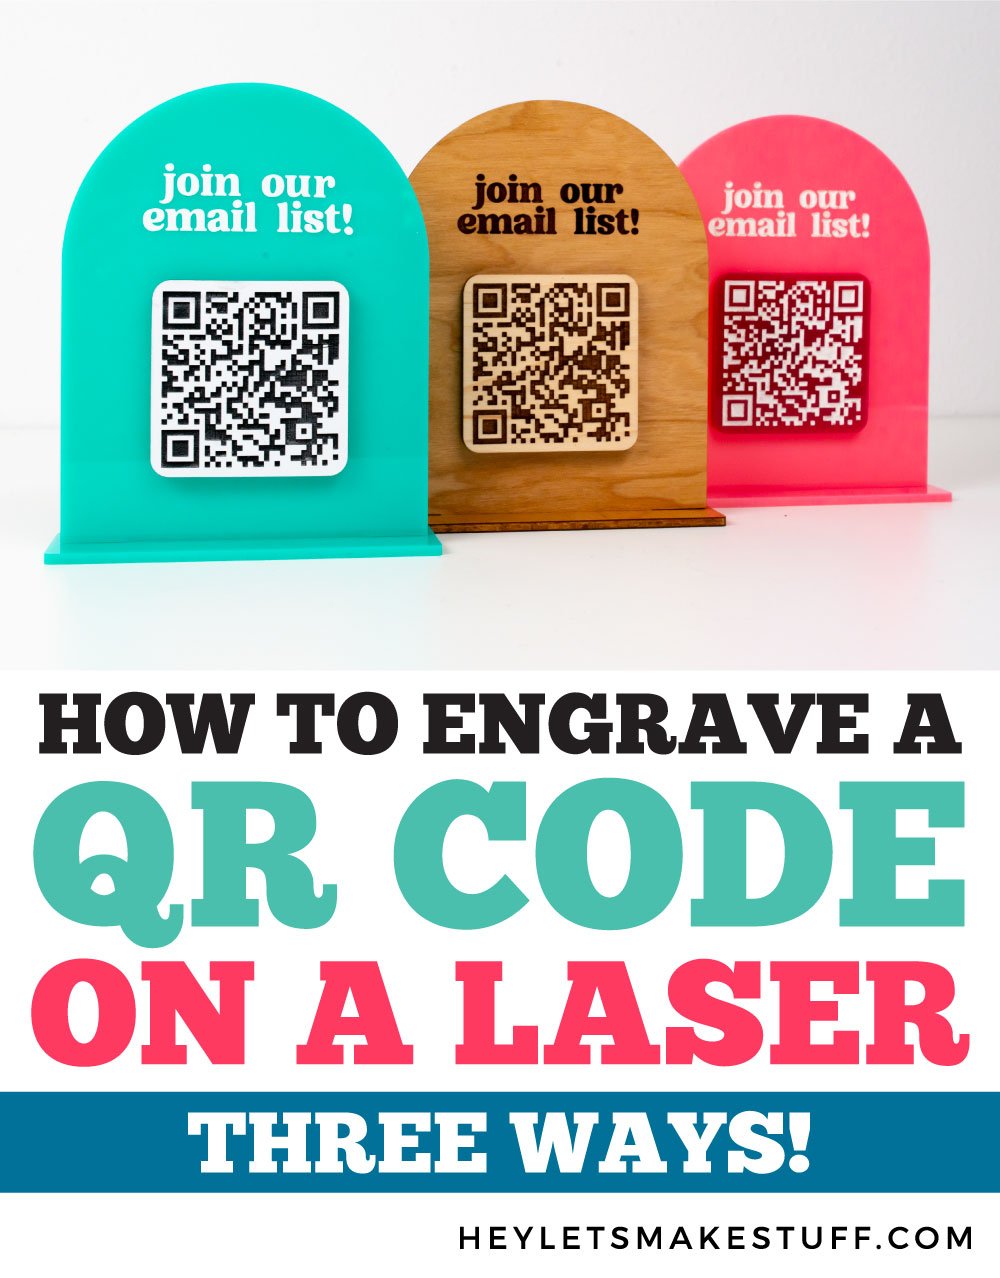 How to Engrave a QR Code with a Laser pin image